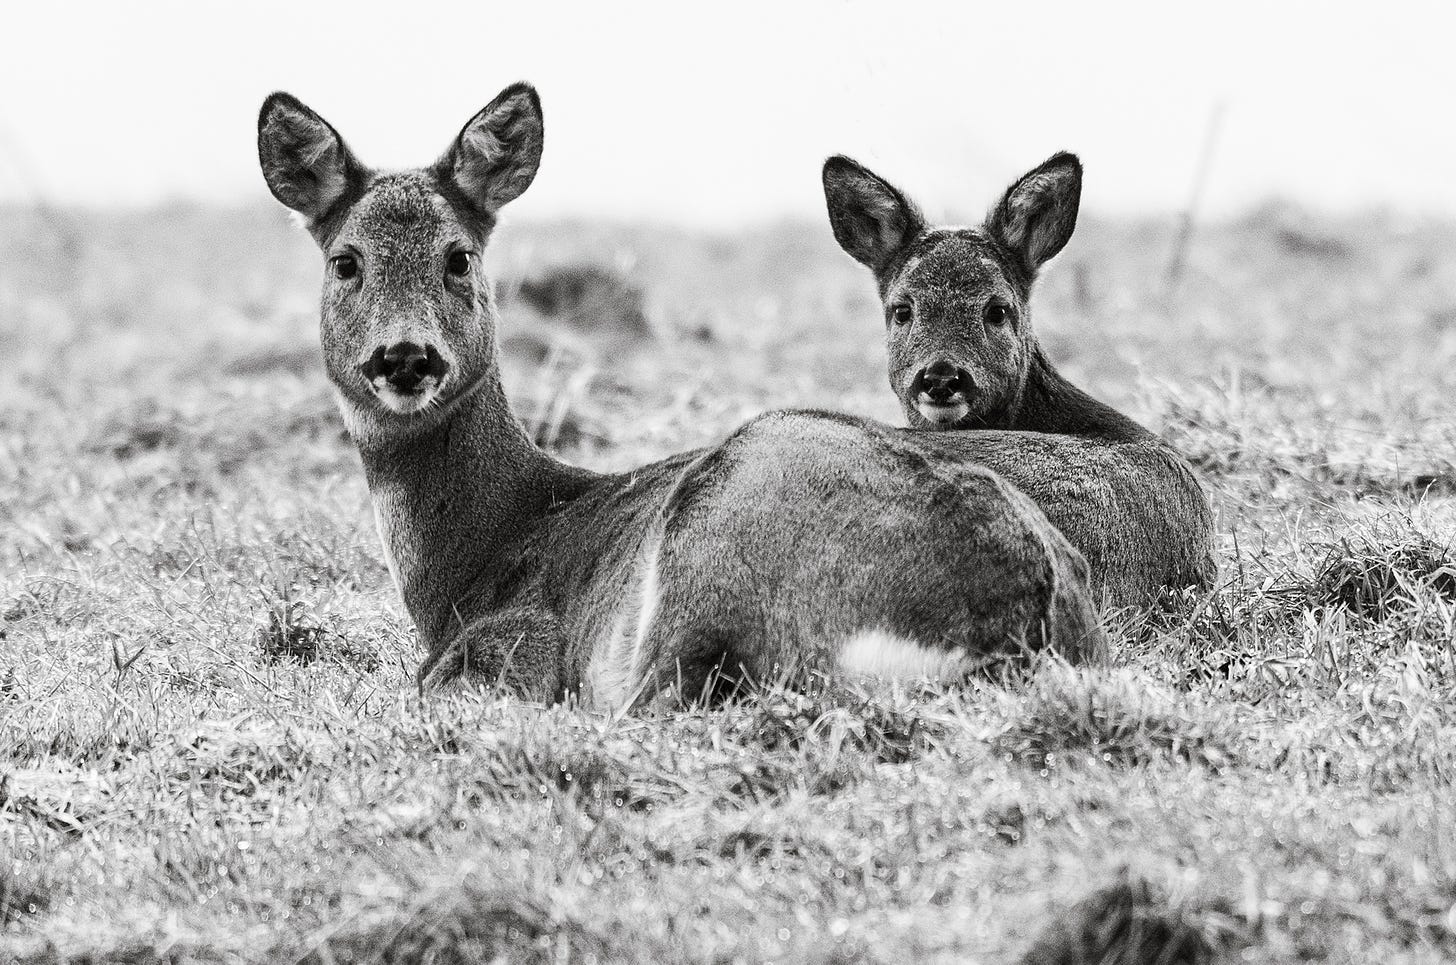 Black and white photo of a roe deer doe and baby